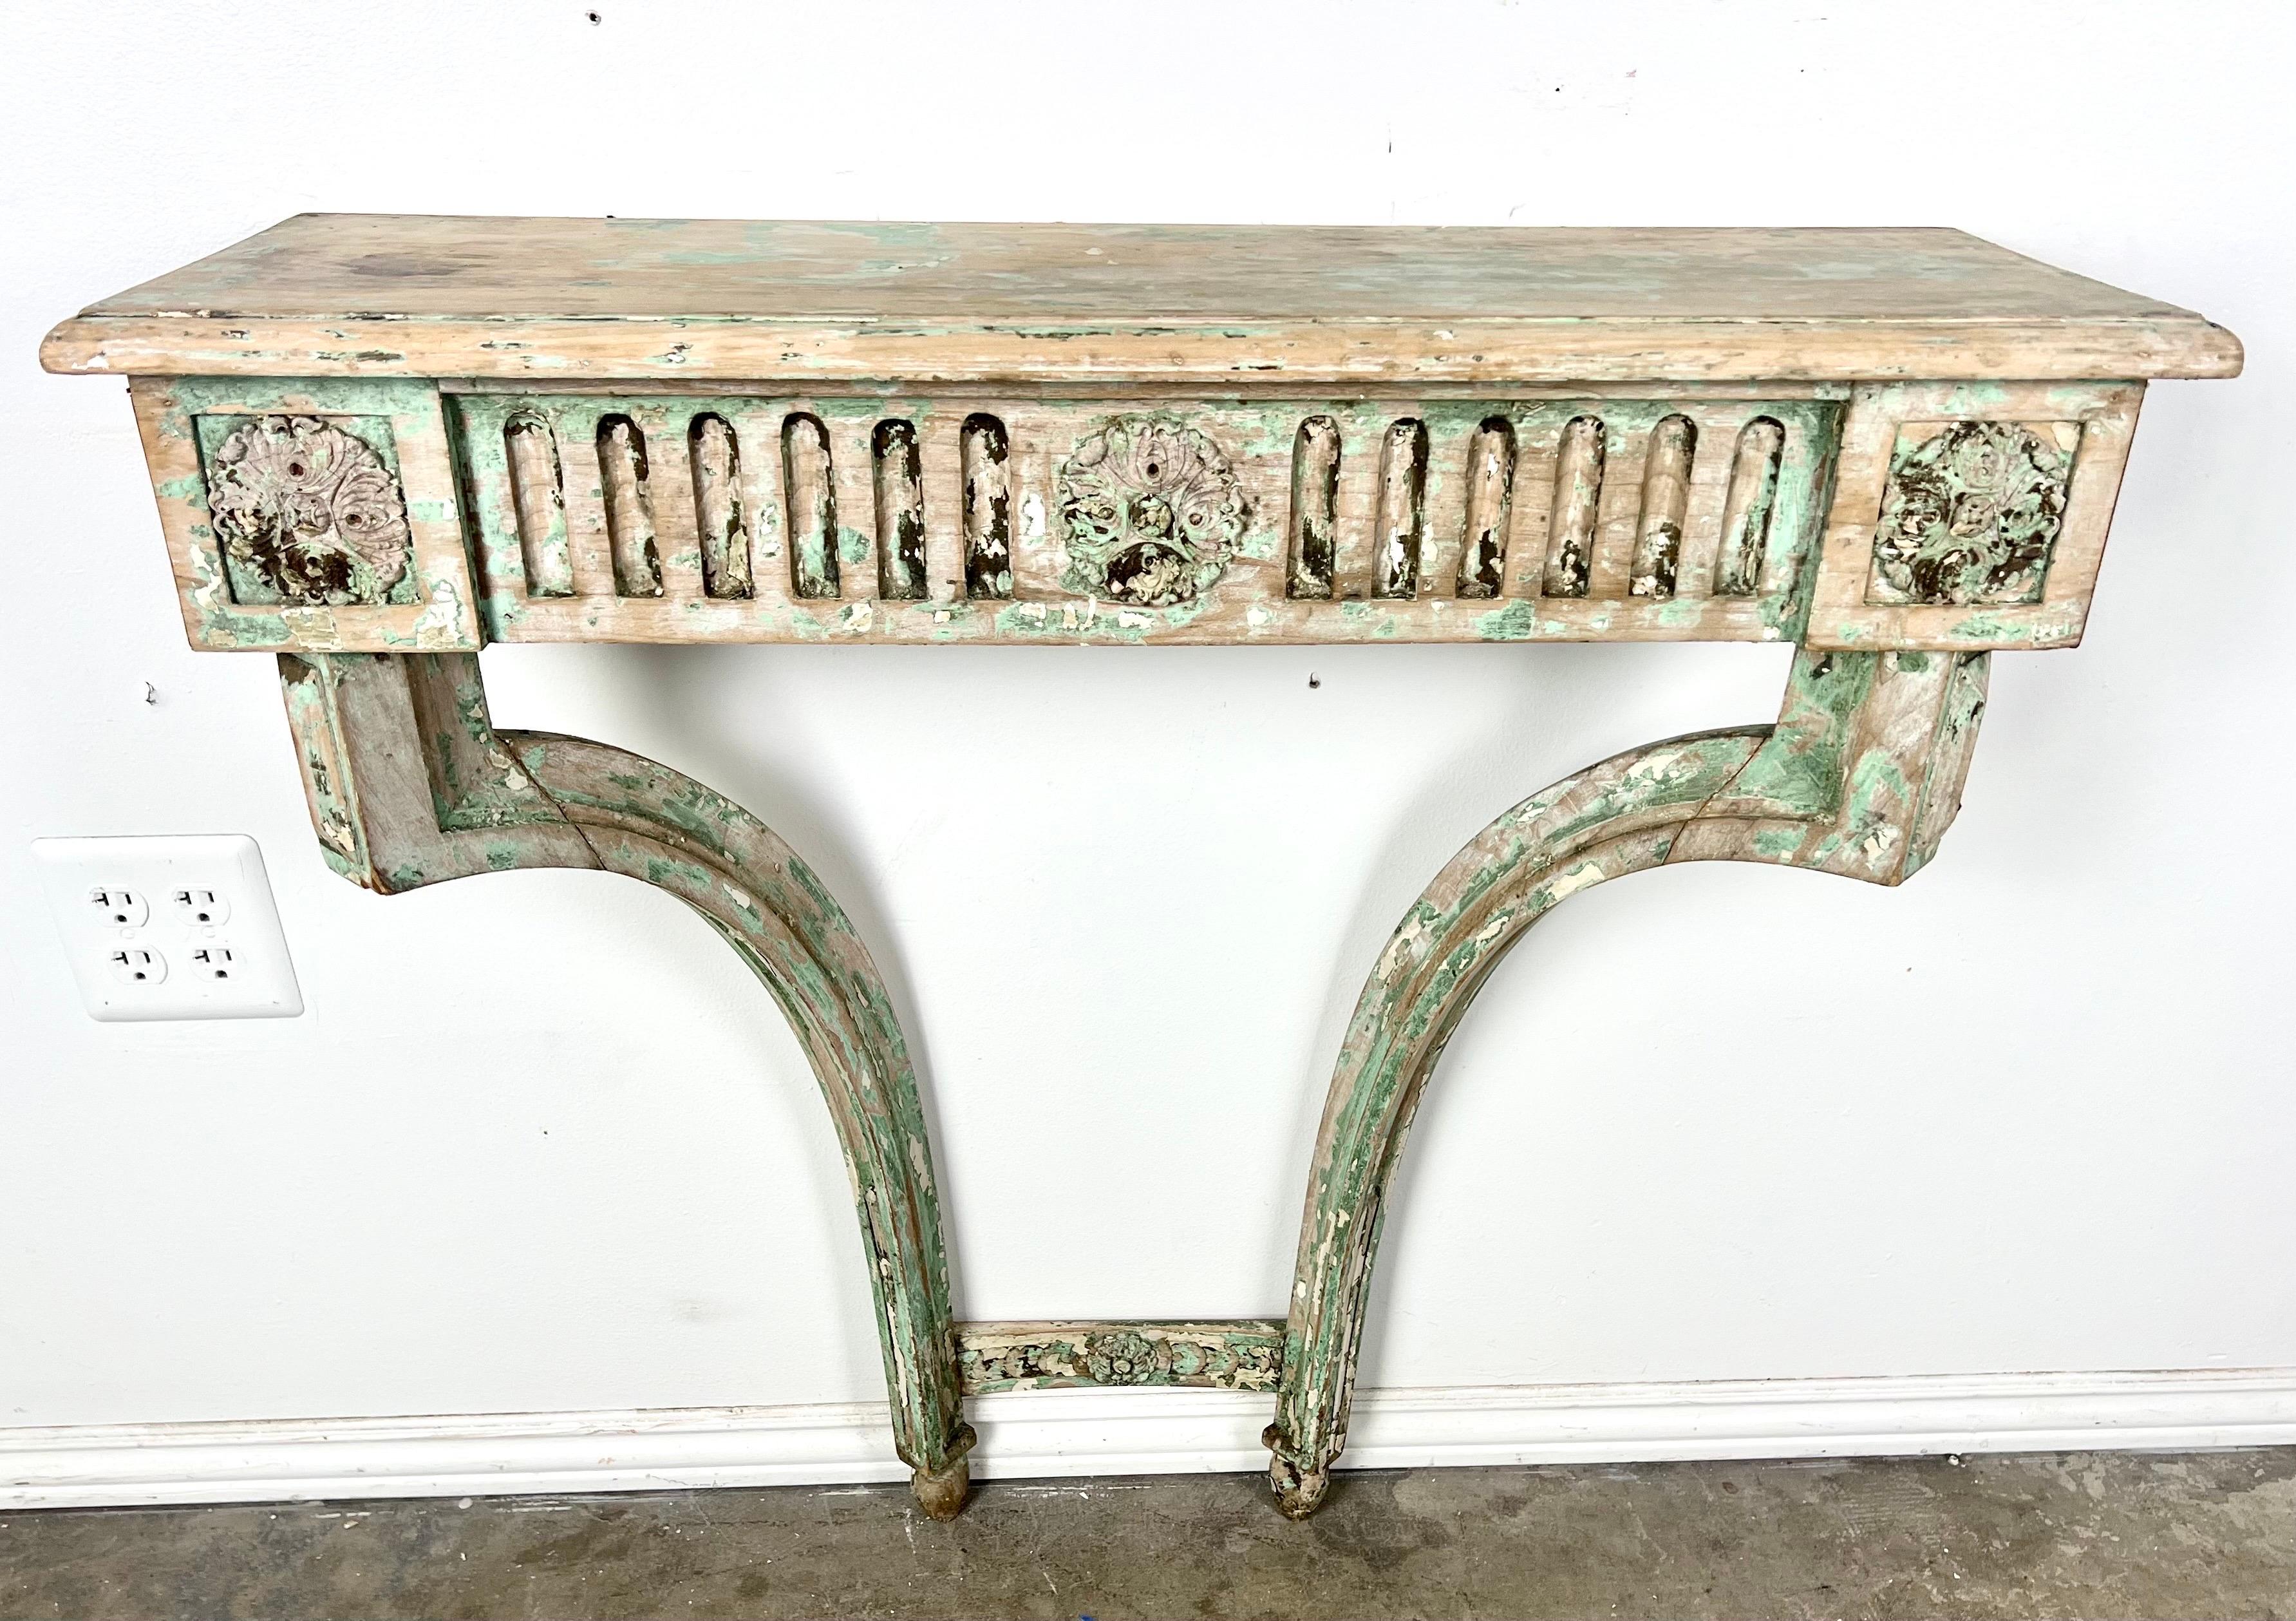 Early 19th century painted console and mirror Italian Louis XVI style.  The mirror has an oil painting depicting a whimsical scene of a man bowing to a woman and another onlooker.  Beautiful worn, robin's egg painted finish, beautiful carving with